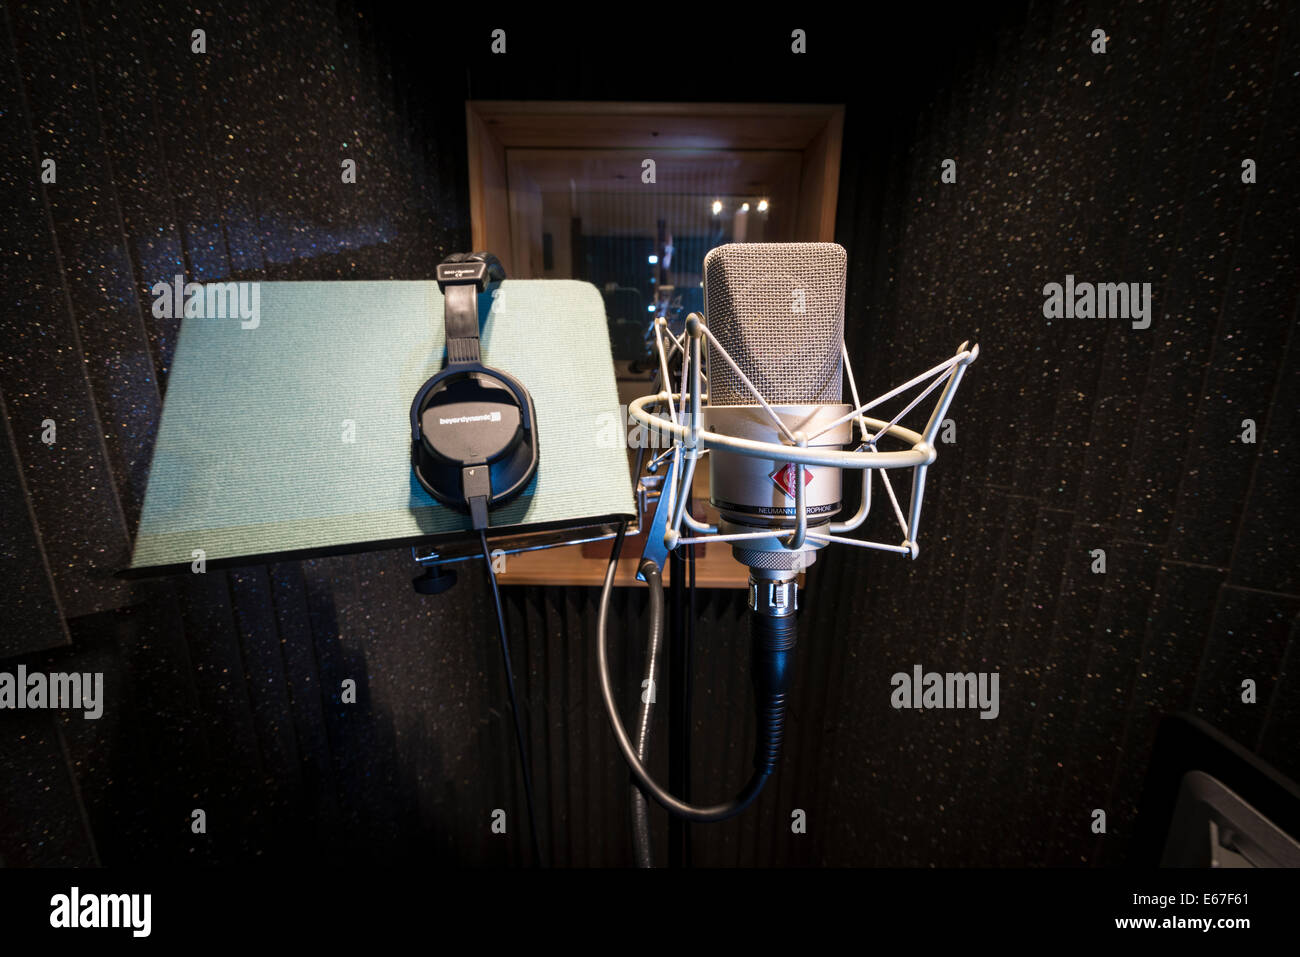 A neuman microphone in a vocal booth in a music recording studio Stock Photo